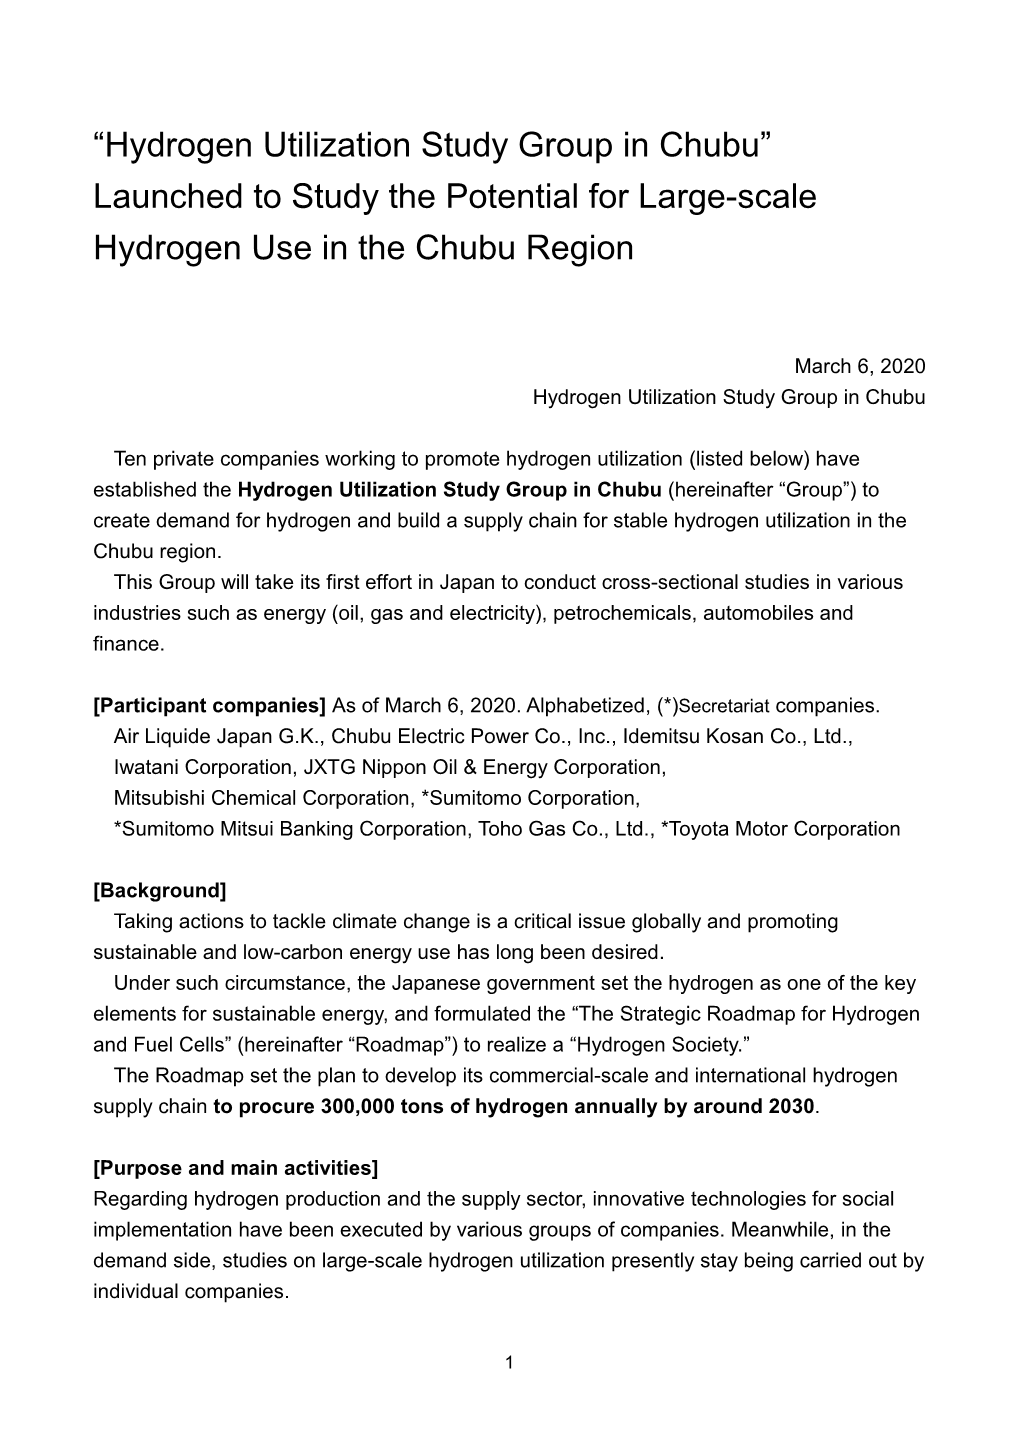 “Hydrogen Utilization Study Group in Chubu” Launched to Study the Potential for Large-Scale Hydrogen Use in the Chubu Region